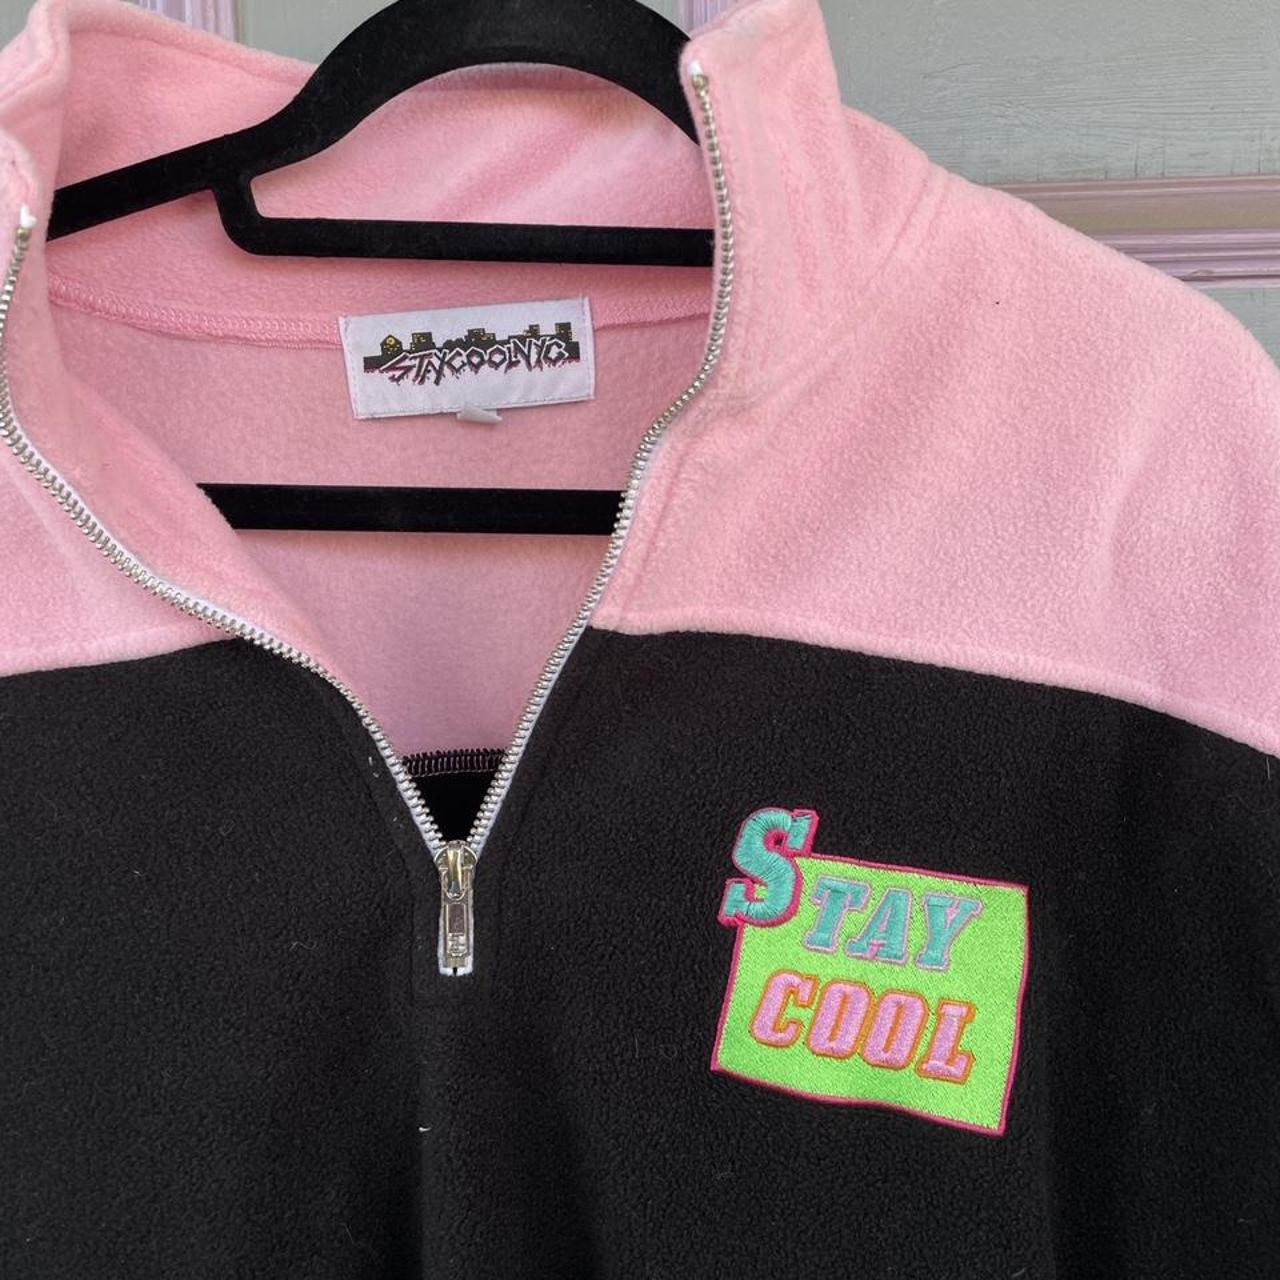 STAY COOL NYC Men's Black and Pink Sweatshirt (2)